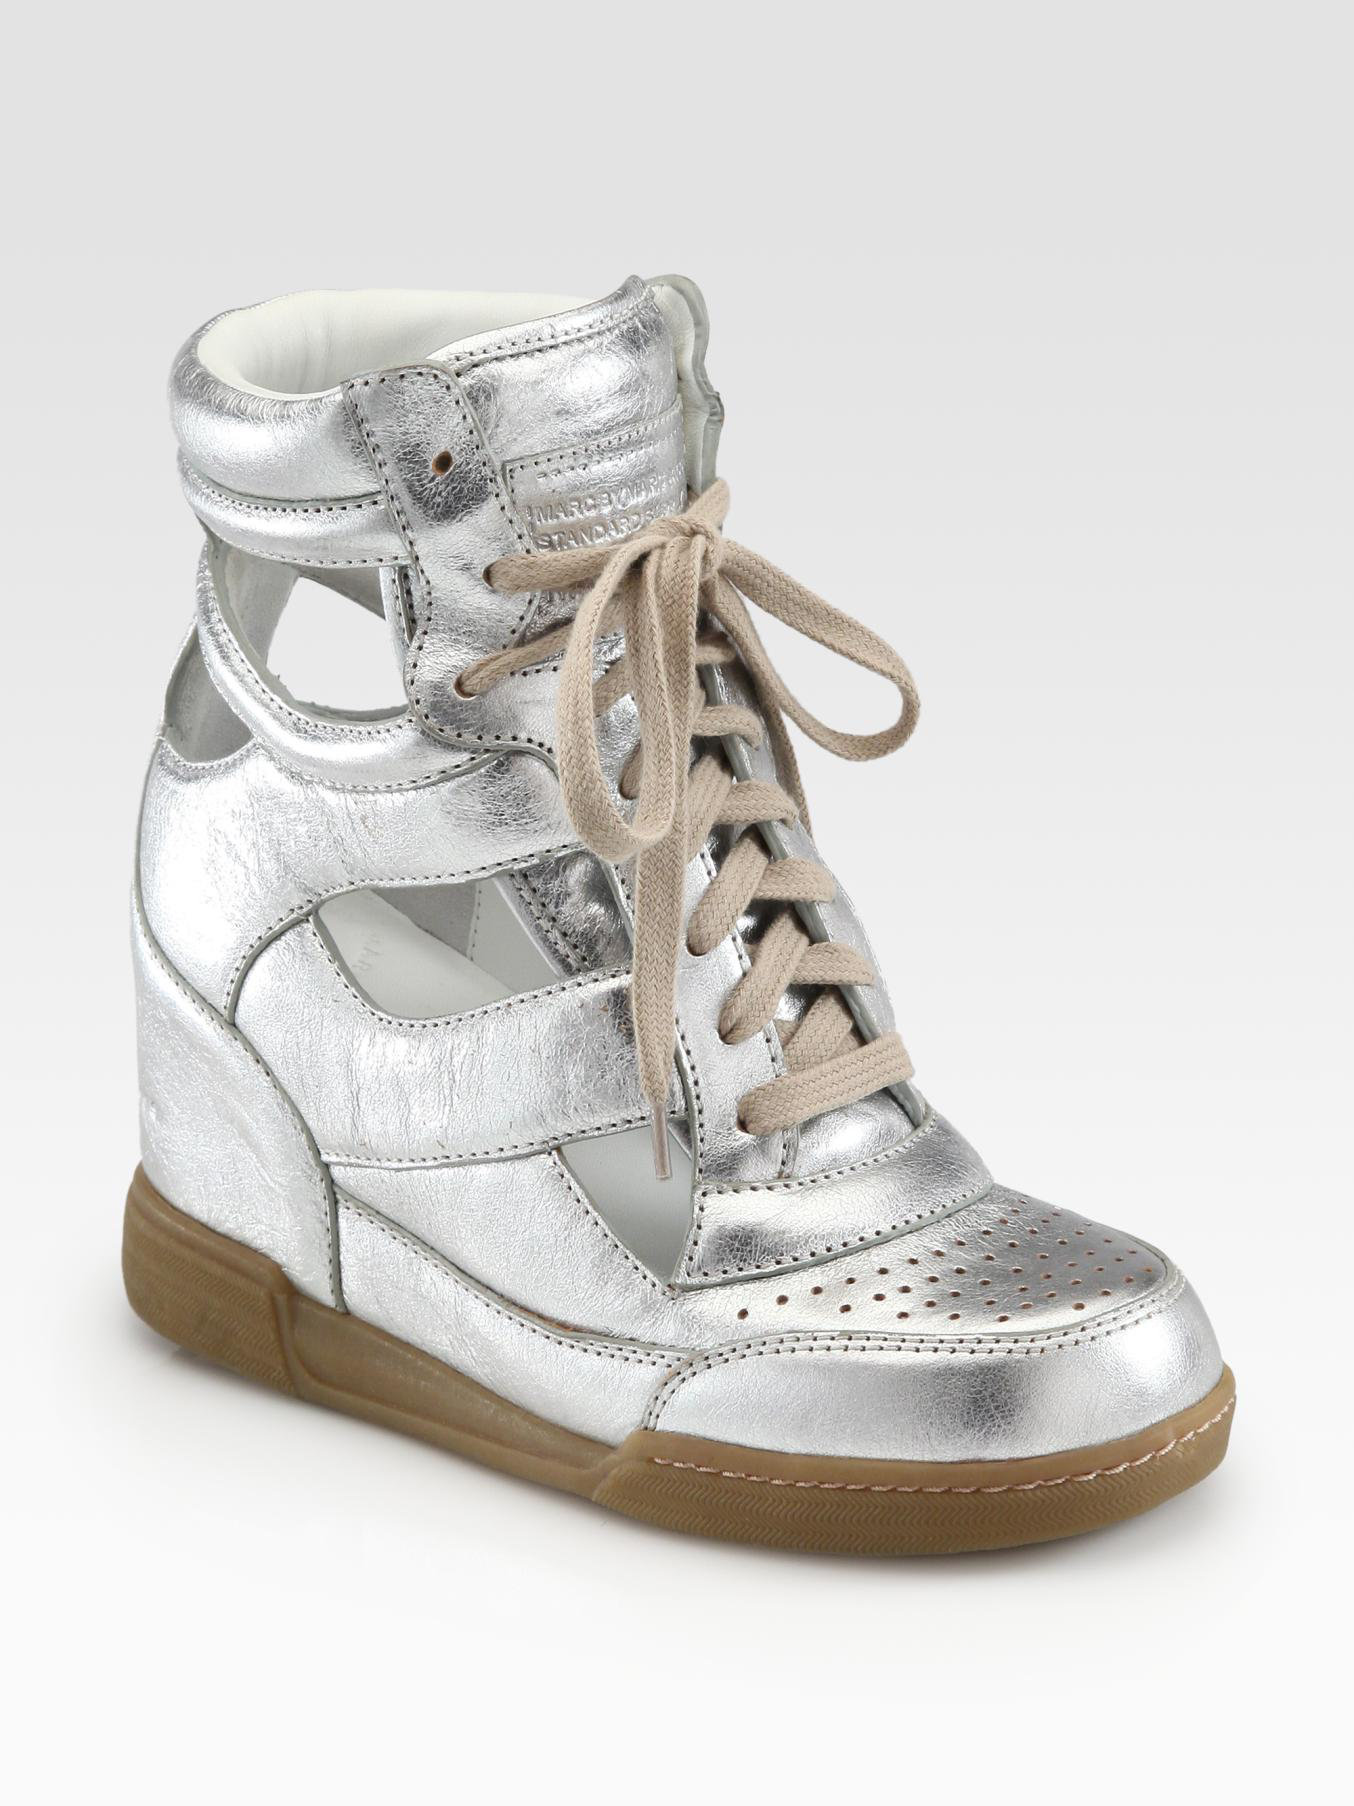 Marc By Marc Jacobs Cutout Metallic Leather Wedge Sneakers in (silver